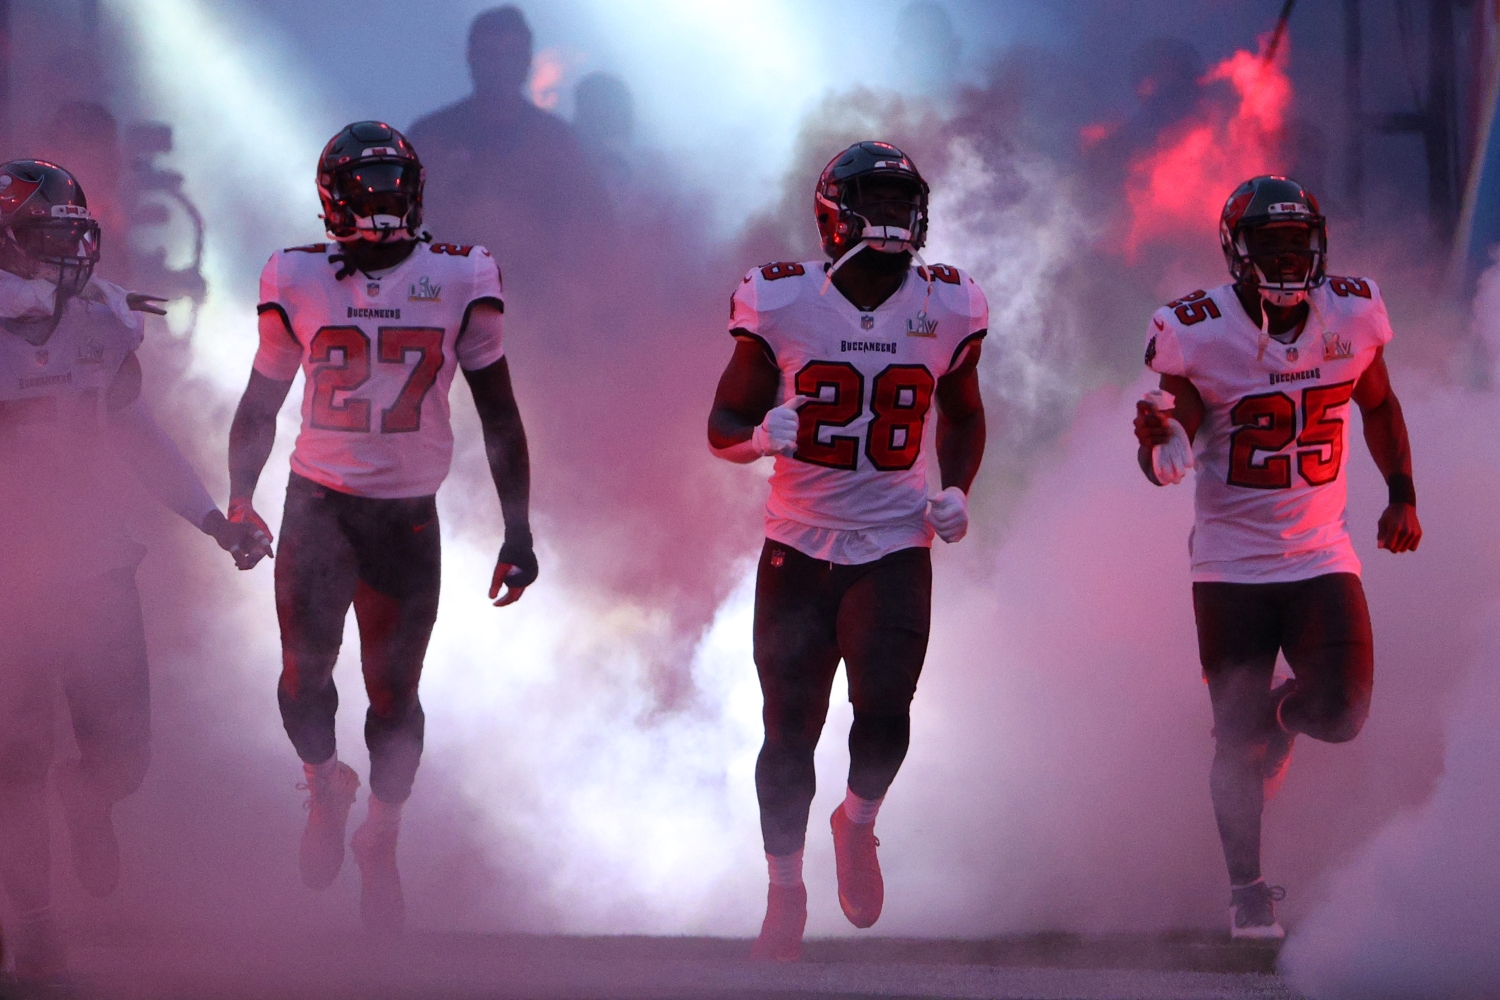 Ronald Jones, Leonard Fournette, and LeSean McCoy of the Tampa Bay Buccaneers take the field before Super Bowl 55.